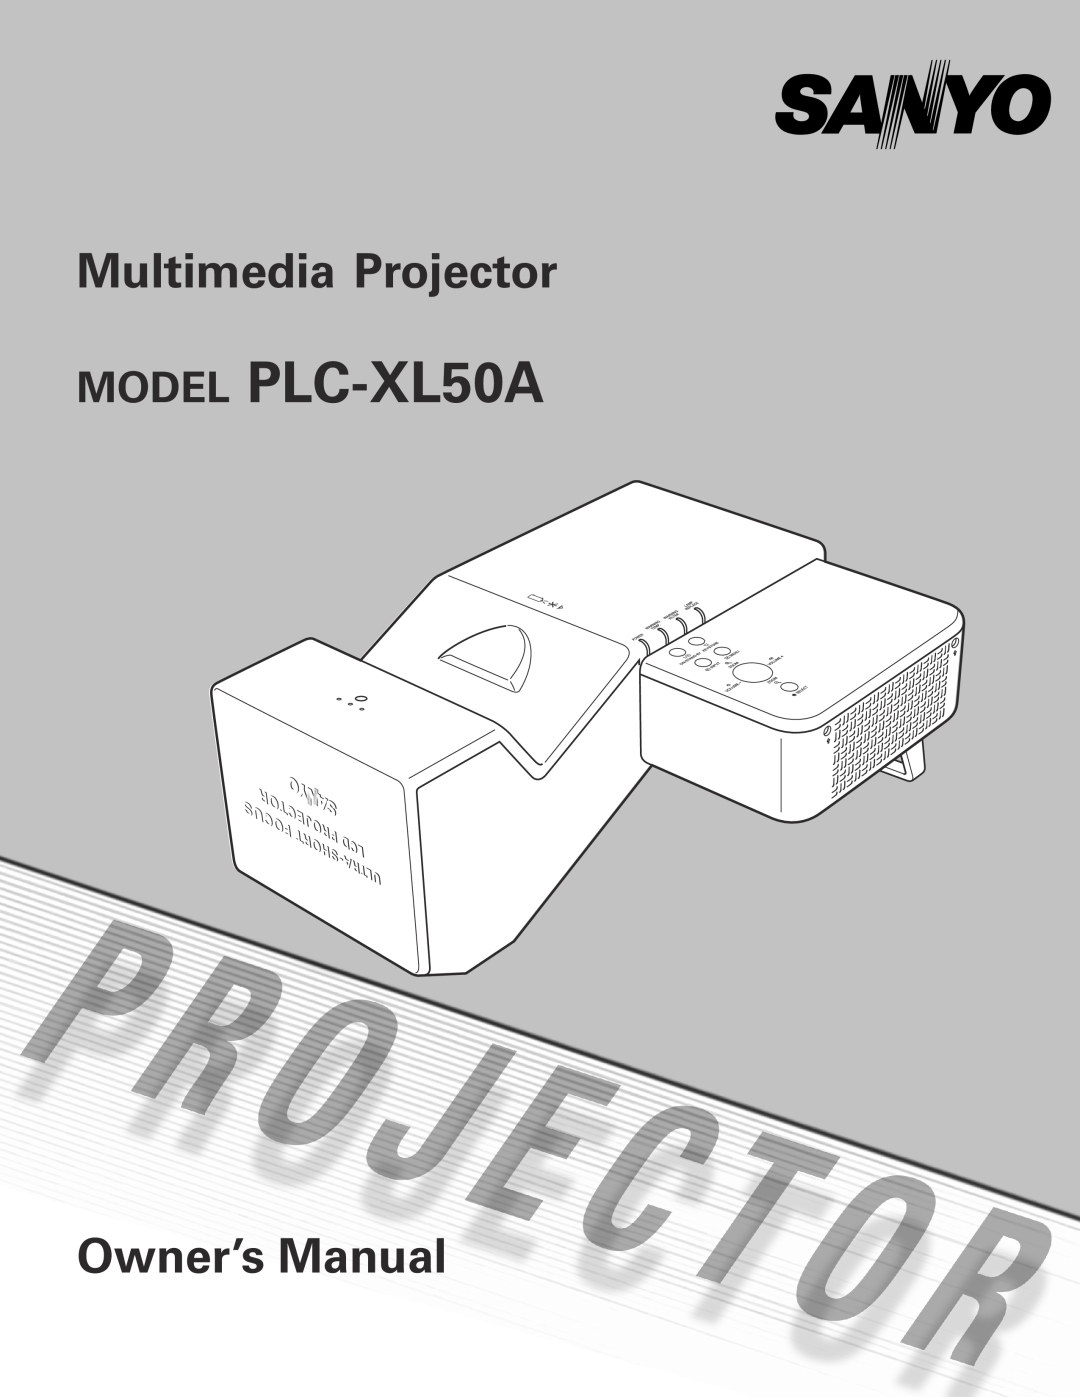 Sanyo owner manual MODEL PLC-XL50A, Multimedia Projector, Owner’s Manual 